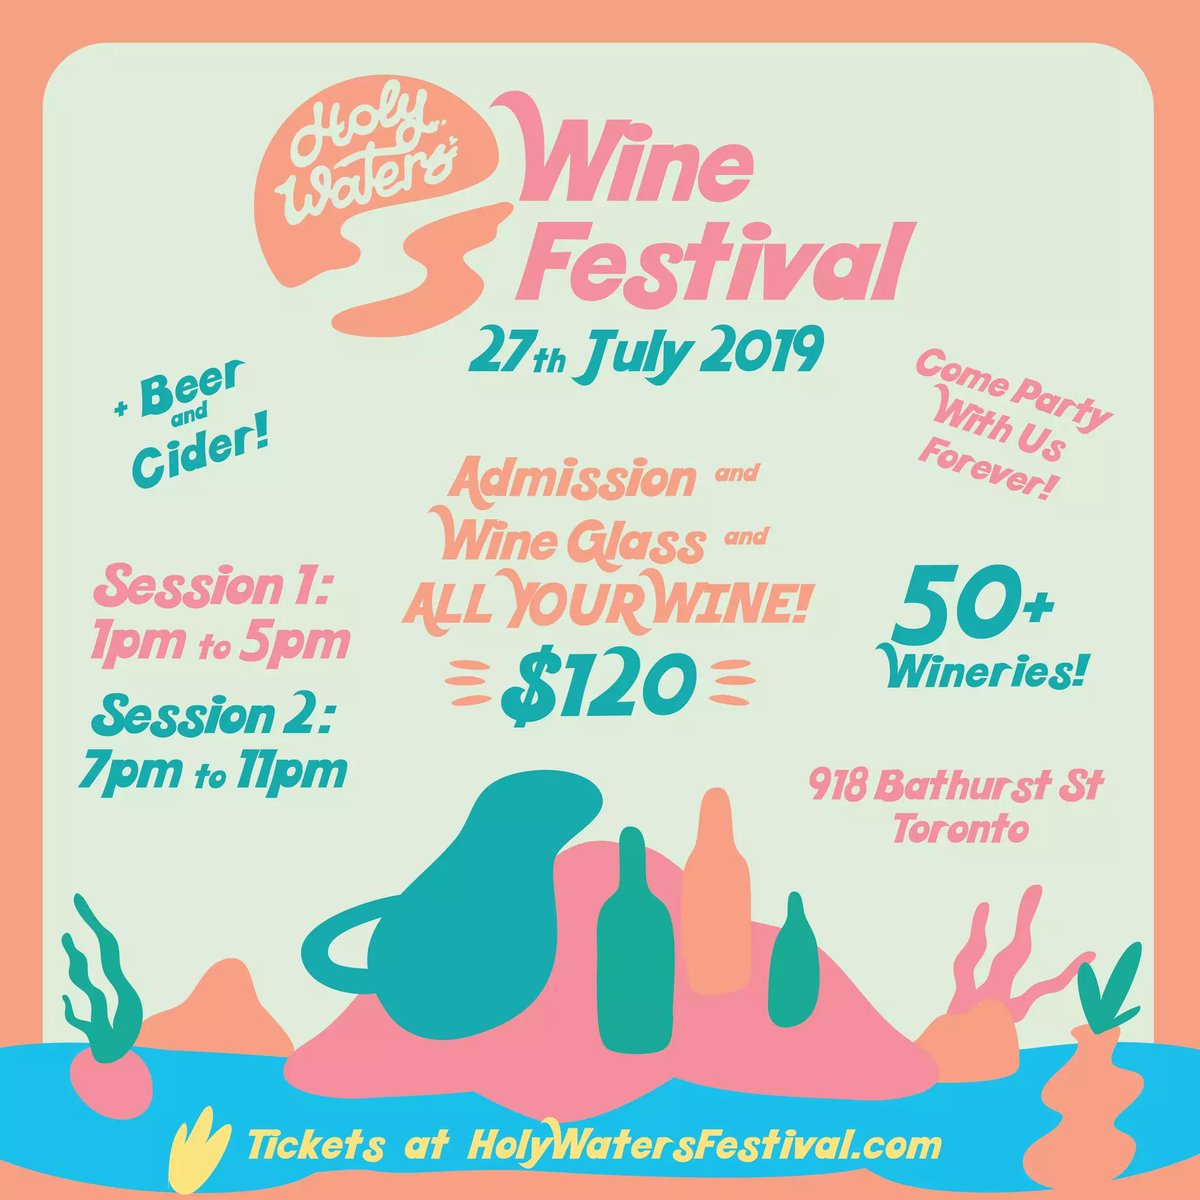 This Saturday at 918 - Paradise Grapevine presents the Holy Waters Wine Festival, where you can drink the wines of over 50 natural, biodynamic, organic and low intervention producers from all over the world! Purchase tickets here: holywatersfestival.com